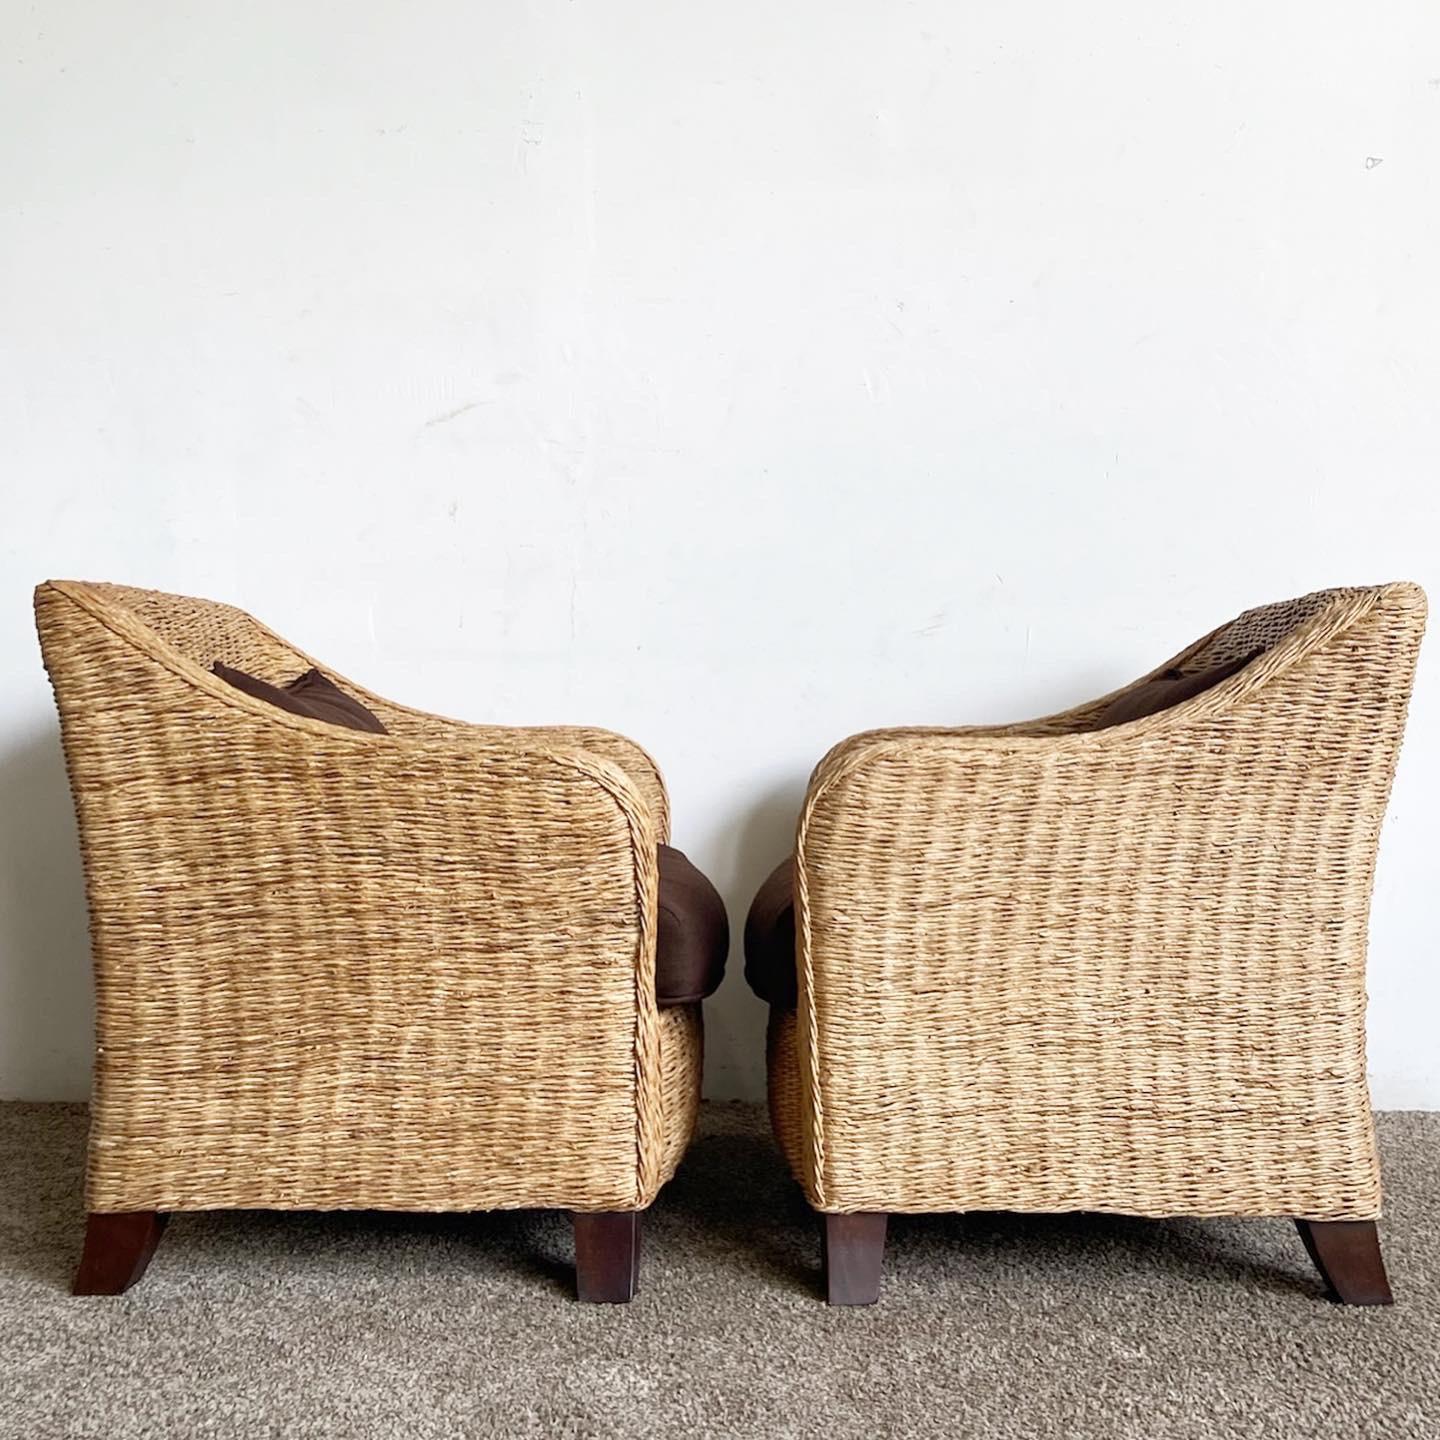 Boho Chic Wicker Arm Chairs With Brown Cushions For Sale 2